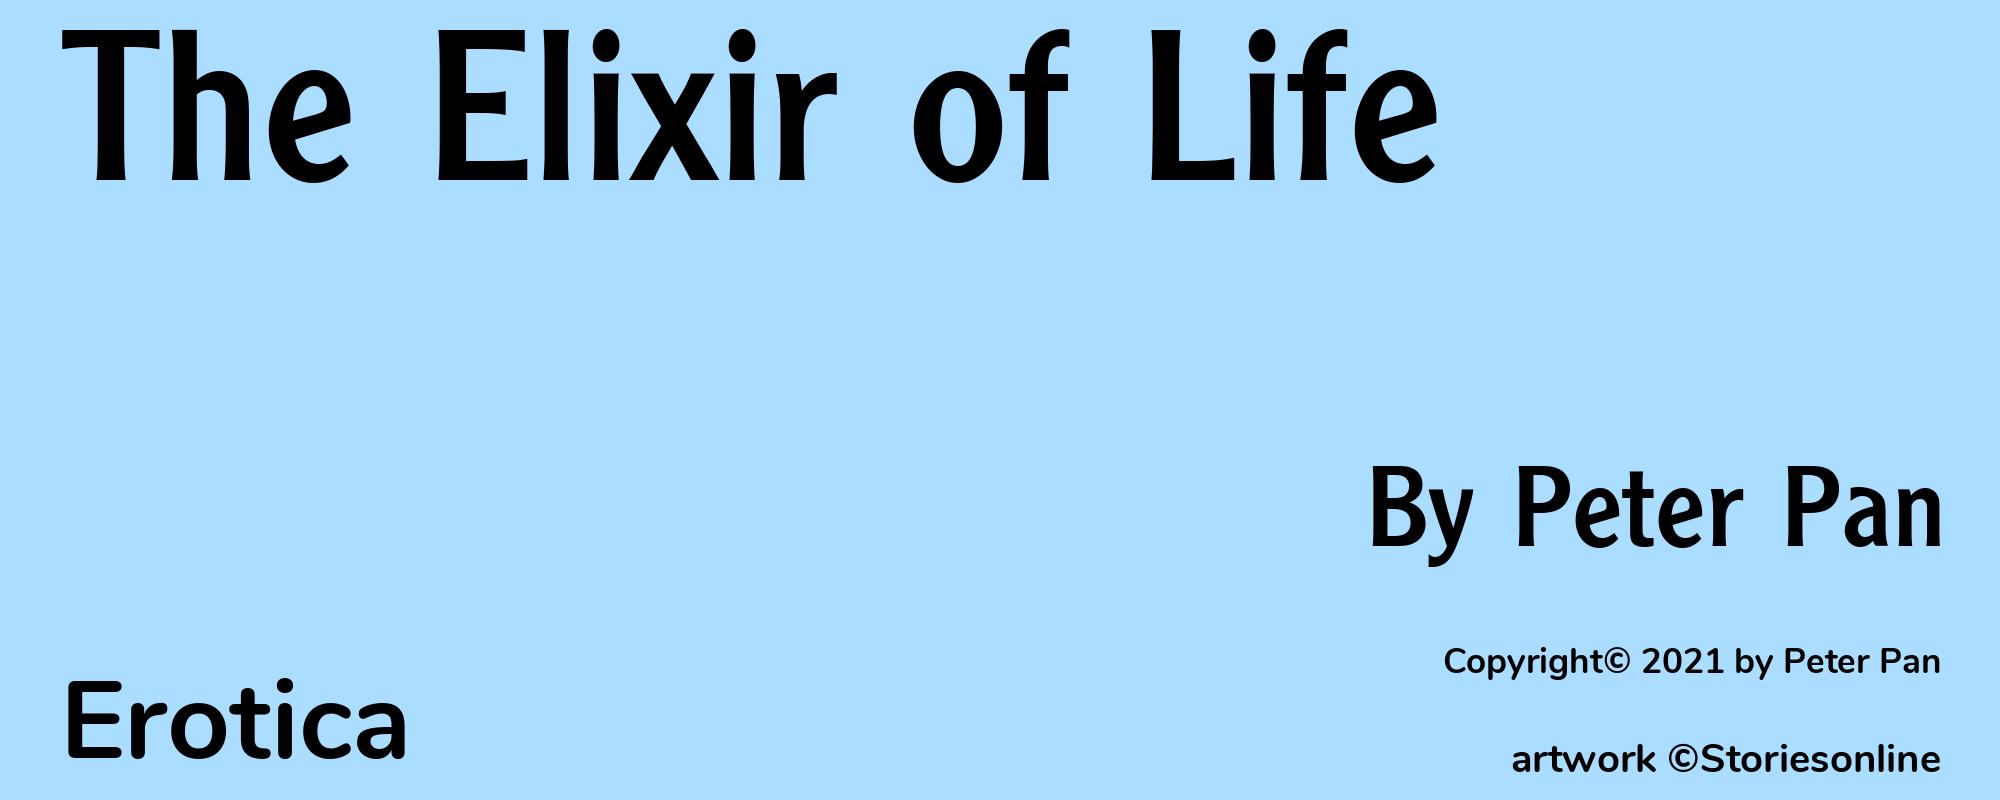 The Elixir of Life - Cover